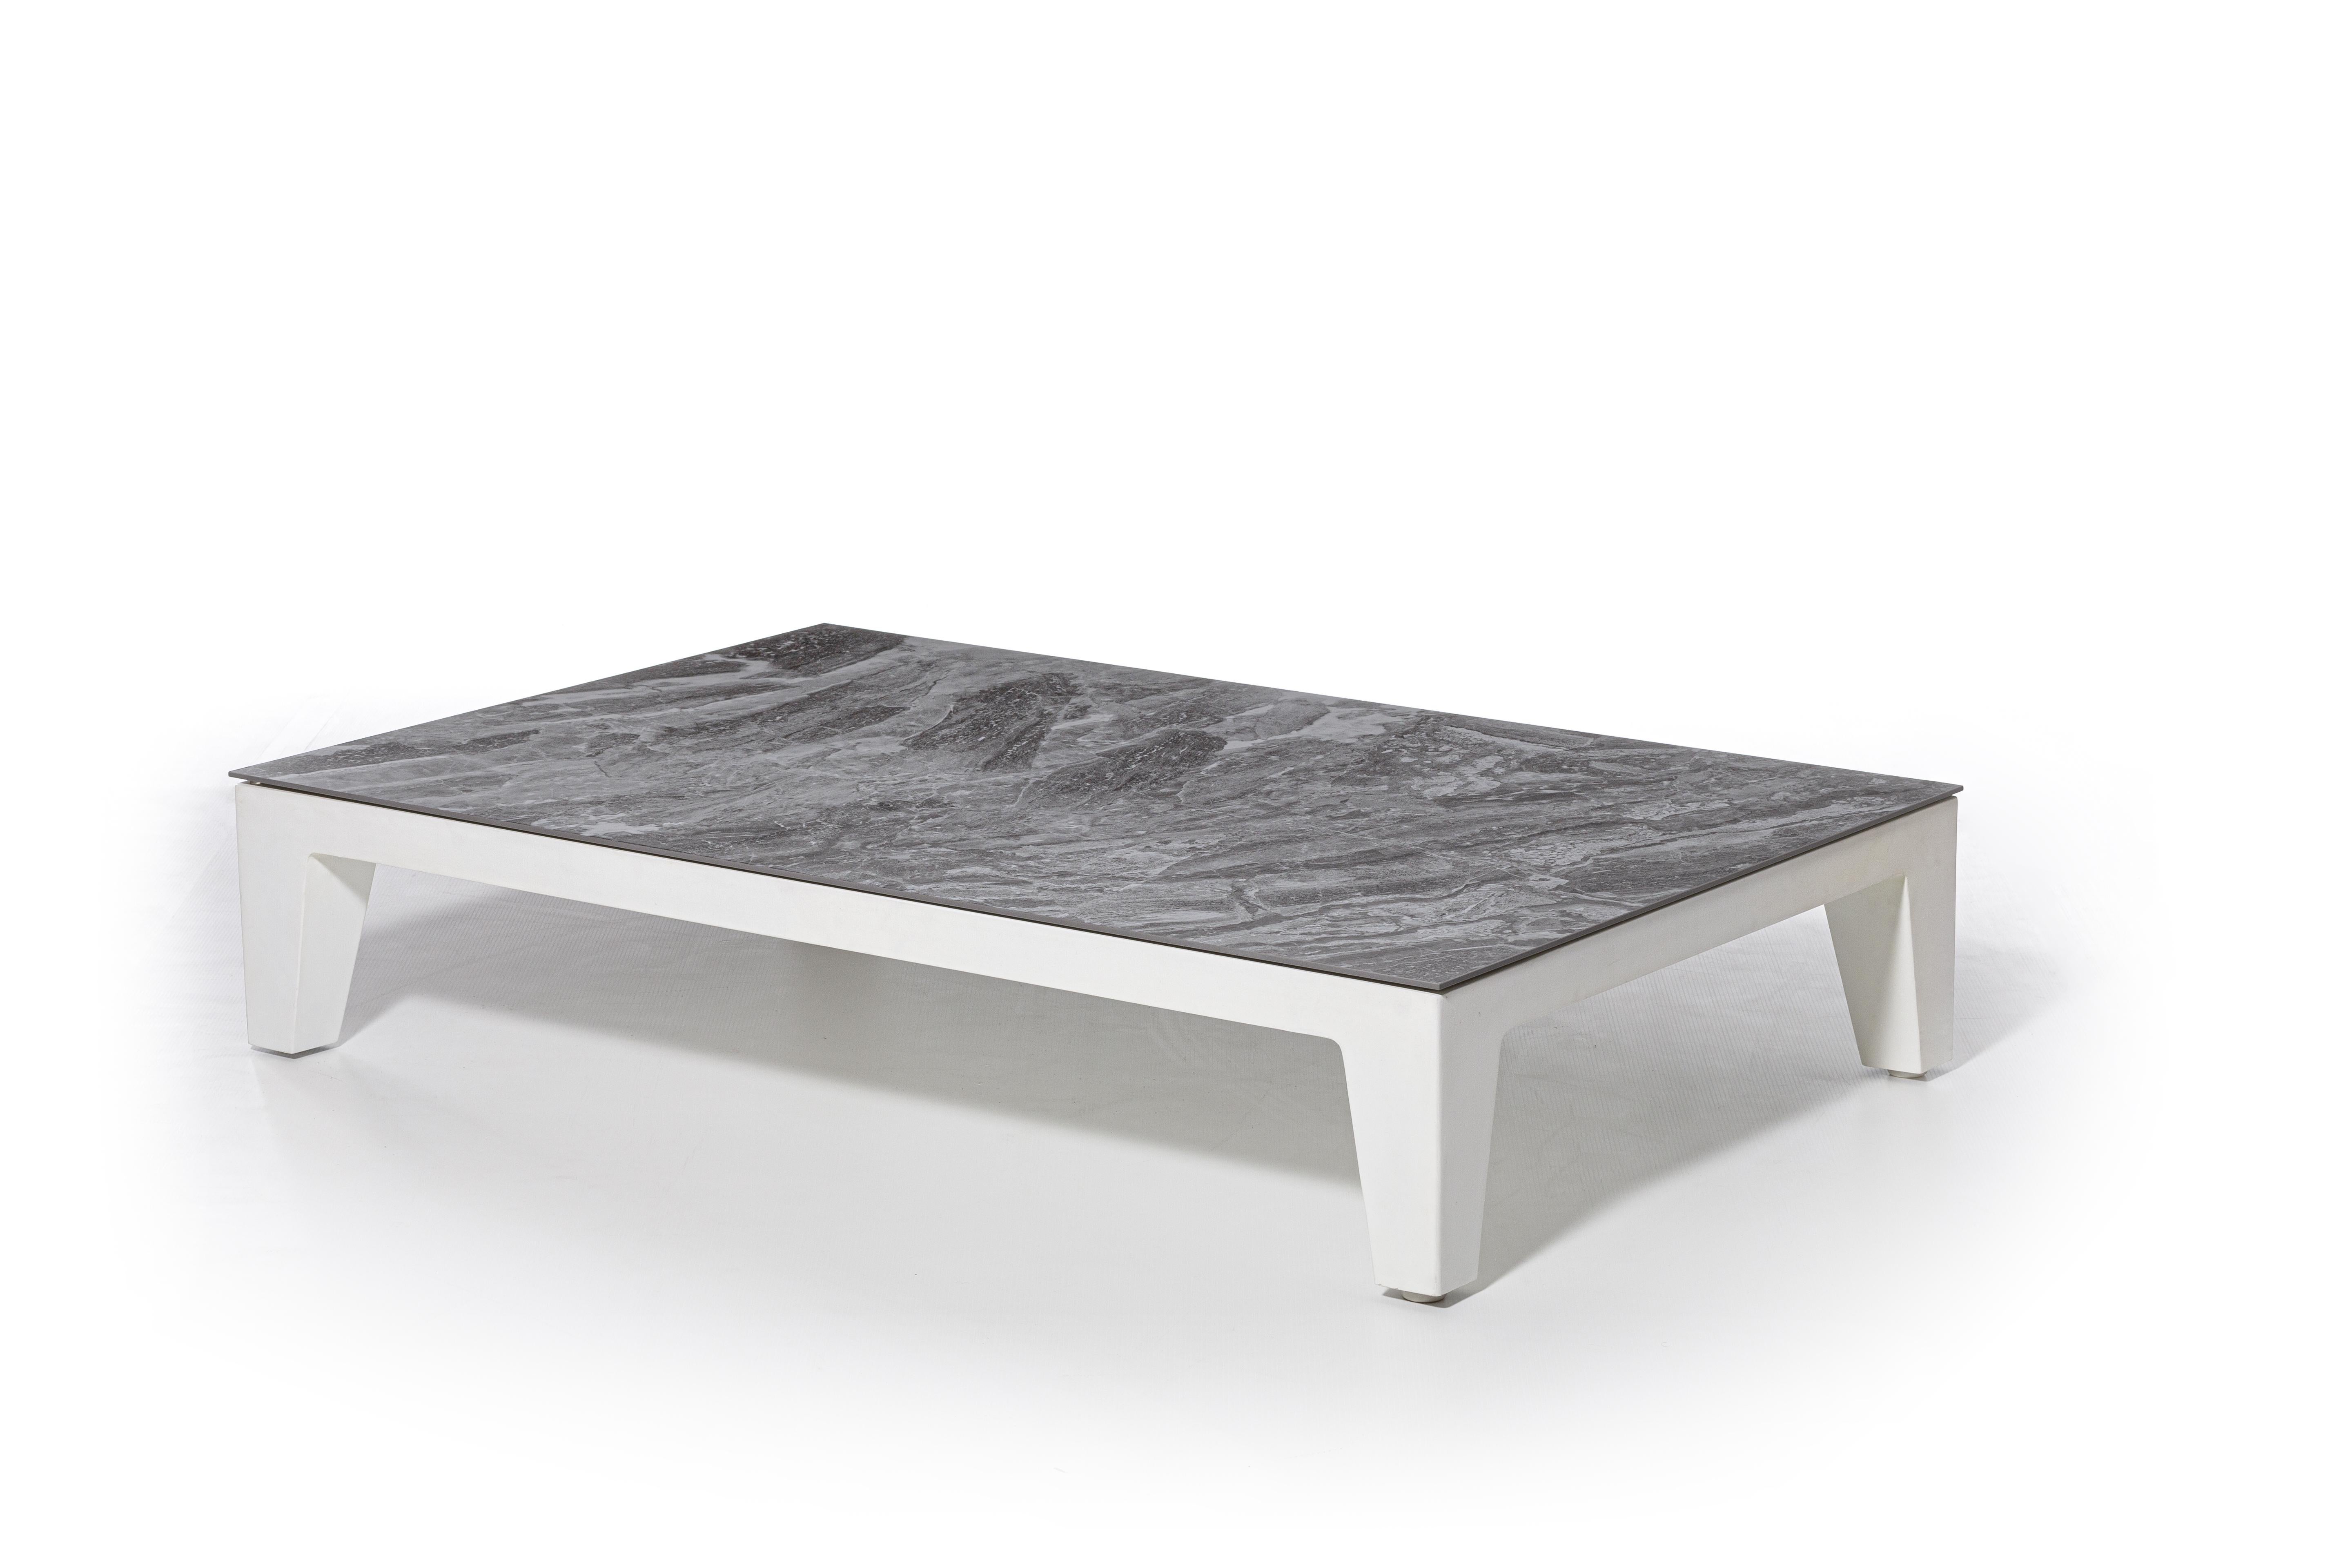 Rectangular coffee table, Inout 155 was born from the combination of diverse materials: formed of a structure in matt white, grey or sage painted aluminium, they have the top available in different finishes: fixed or extendible natural teak slats,